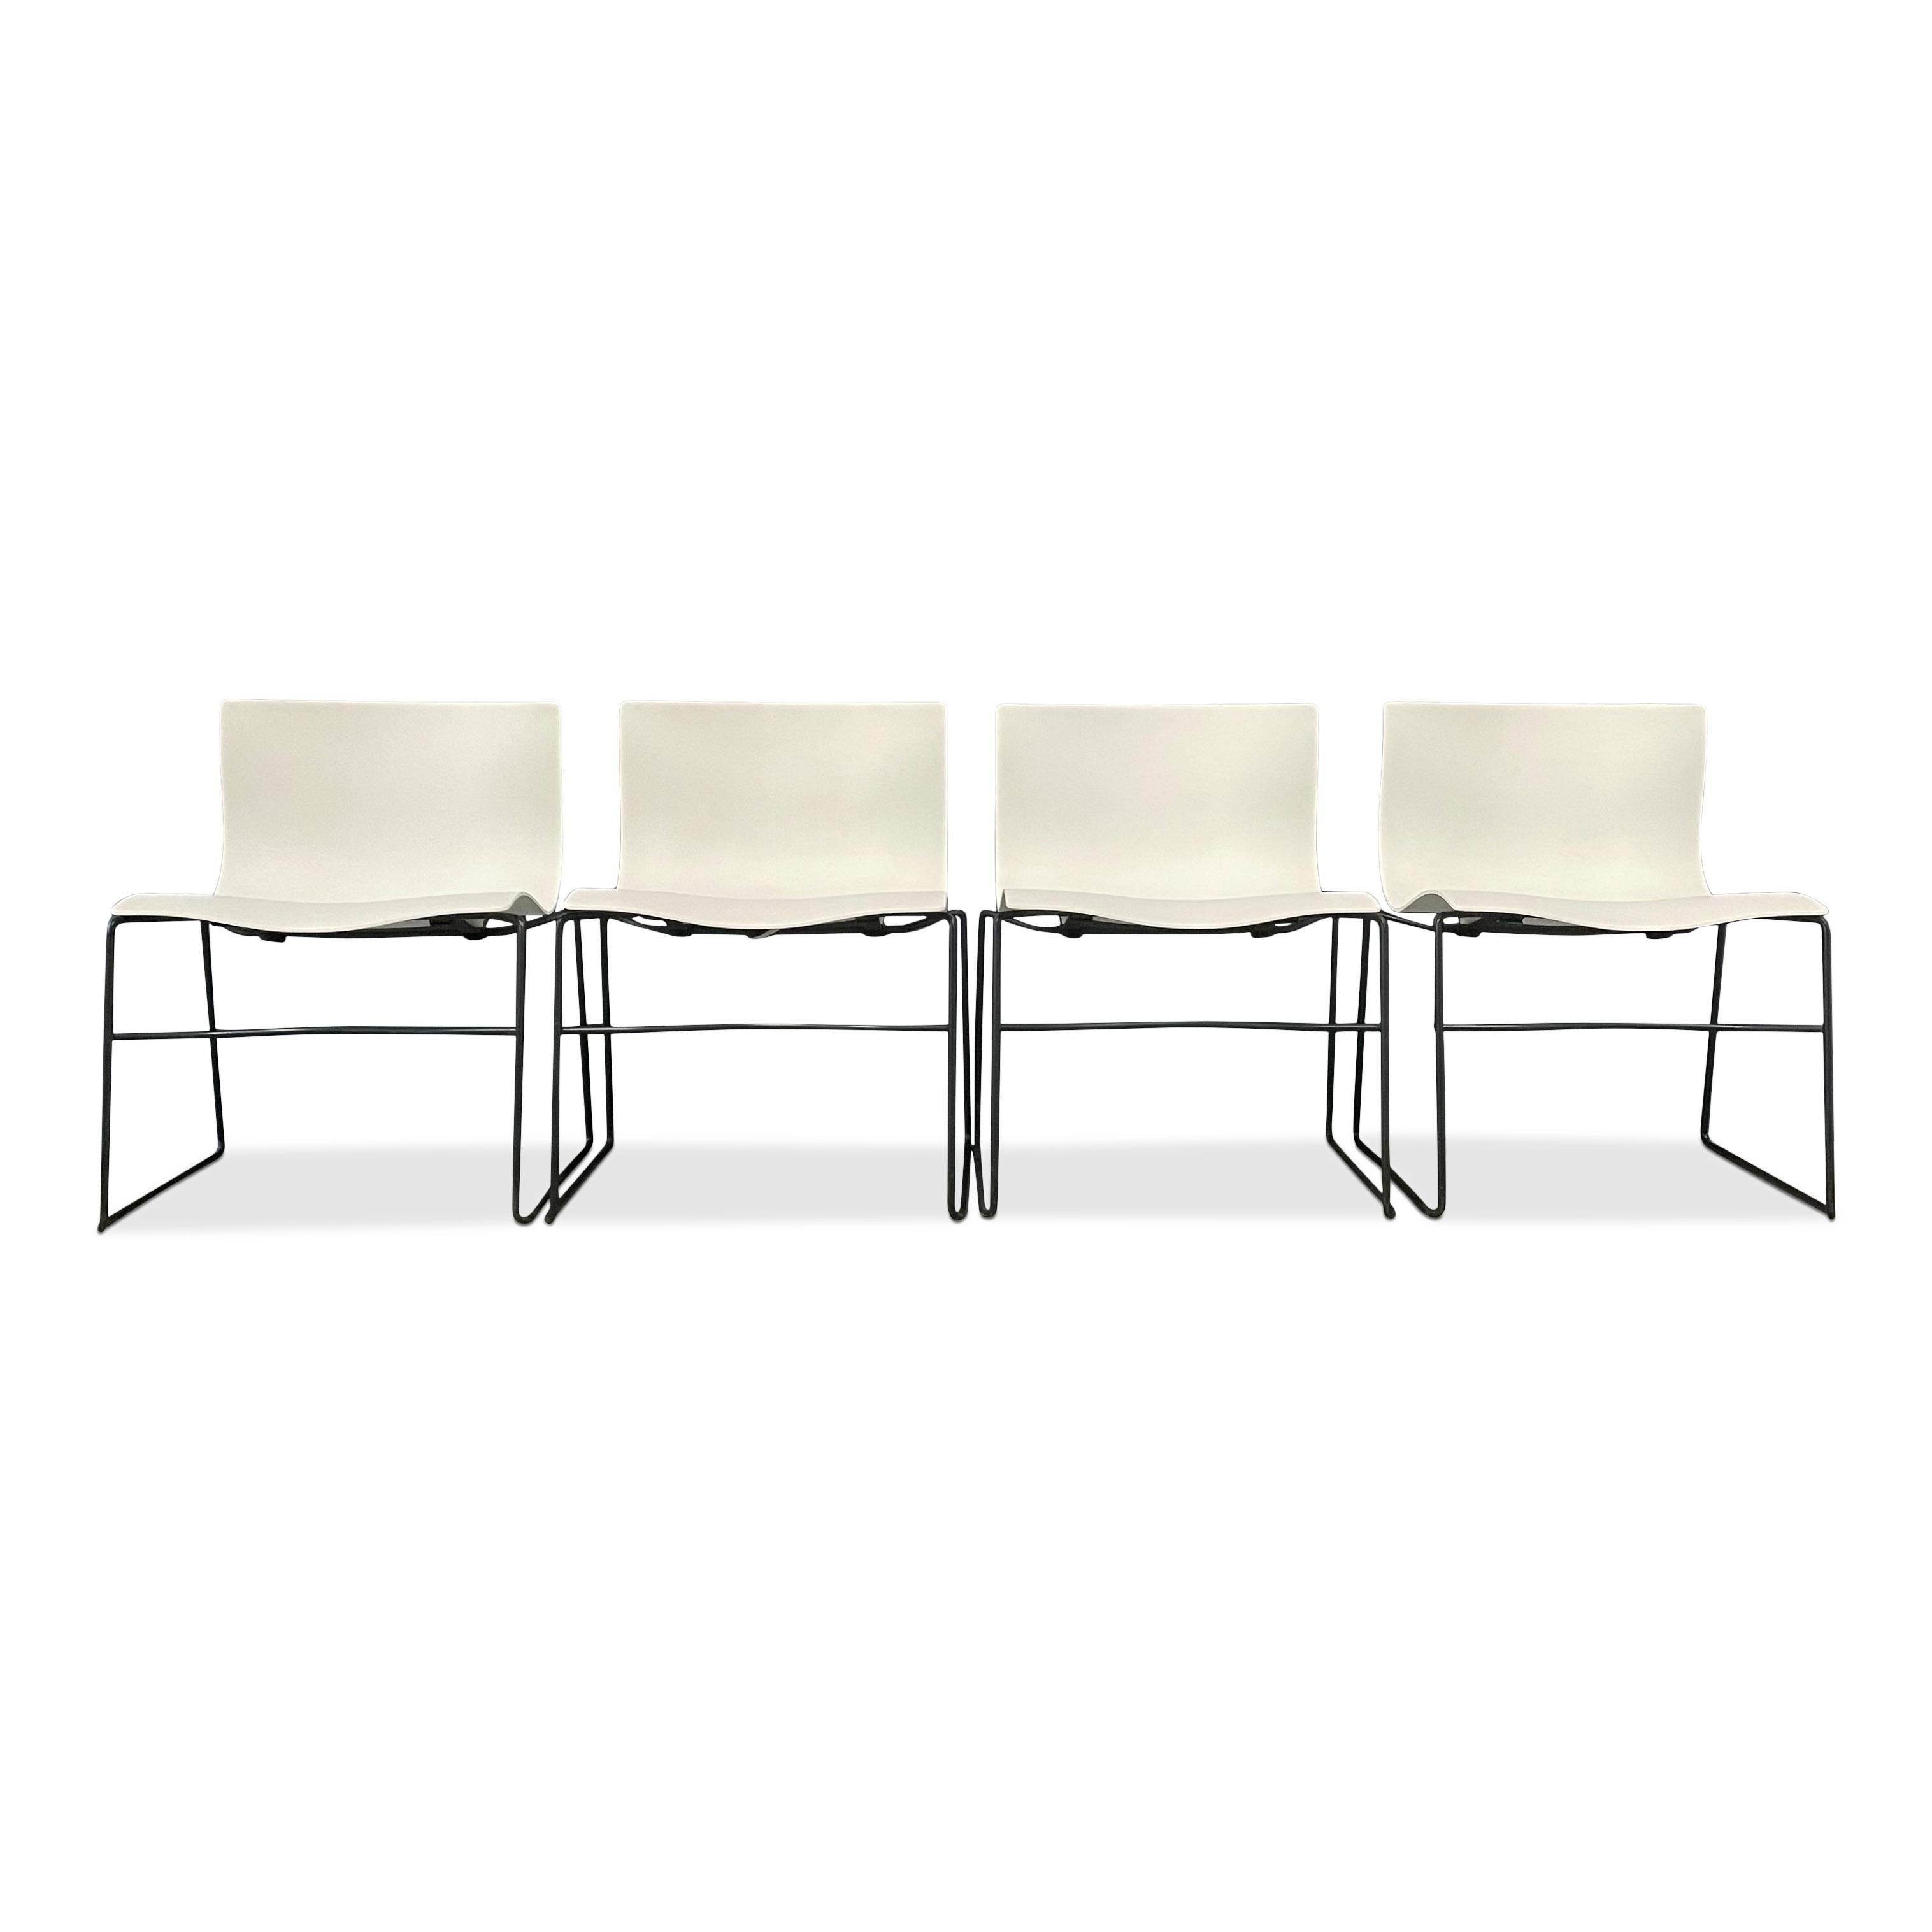 Iconic design by Massimo Vignelli for Knoll. These ethereal chairs, seeming floating in air are fully labeled with an embossed Knoll, Vignelli design and a paper Knoll Label.

This listing is for a pair of chairs! There are a total of 60 chairs.